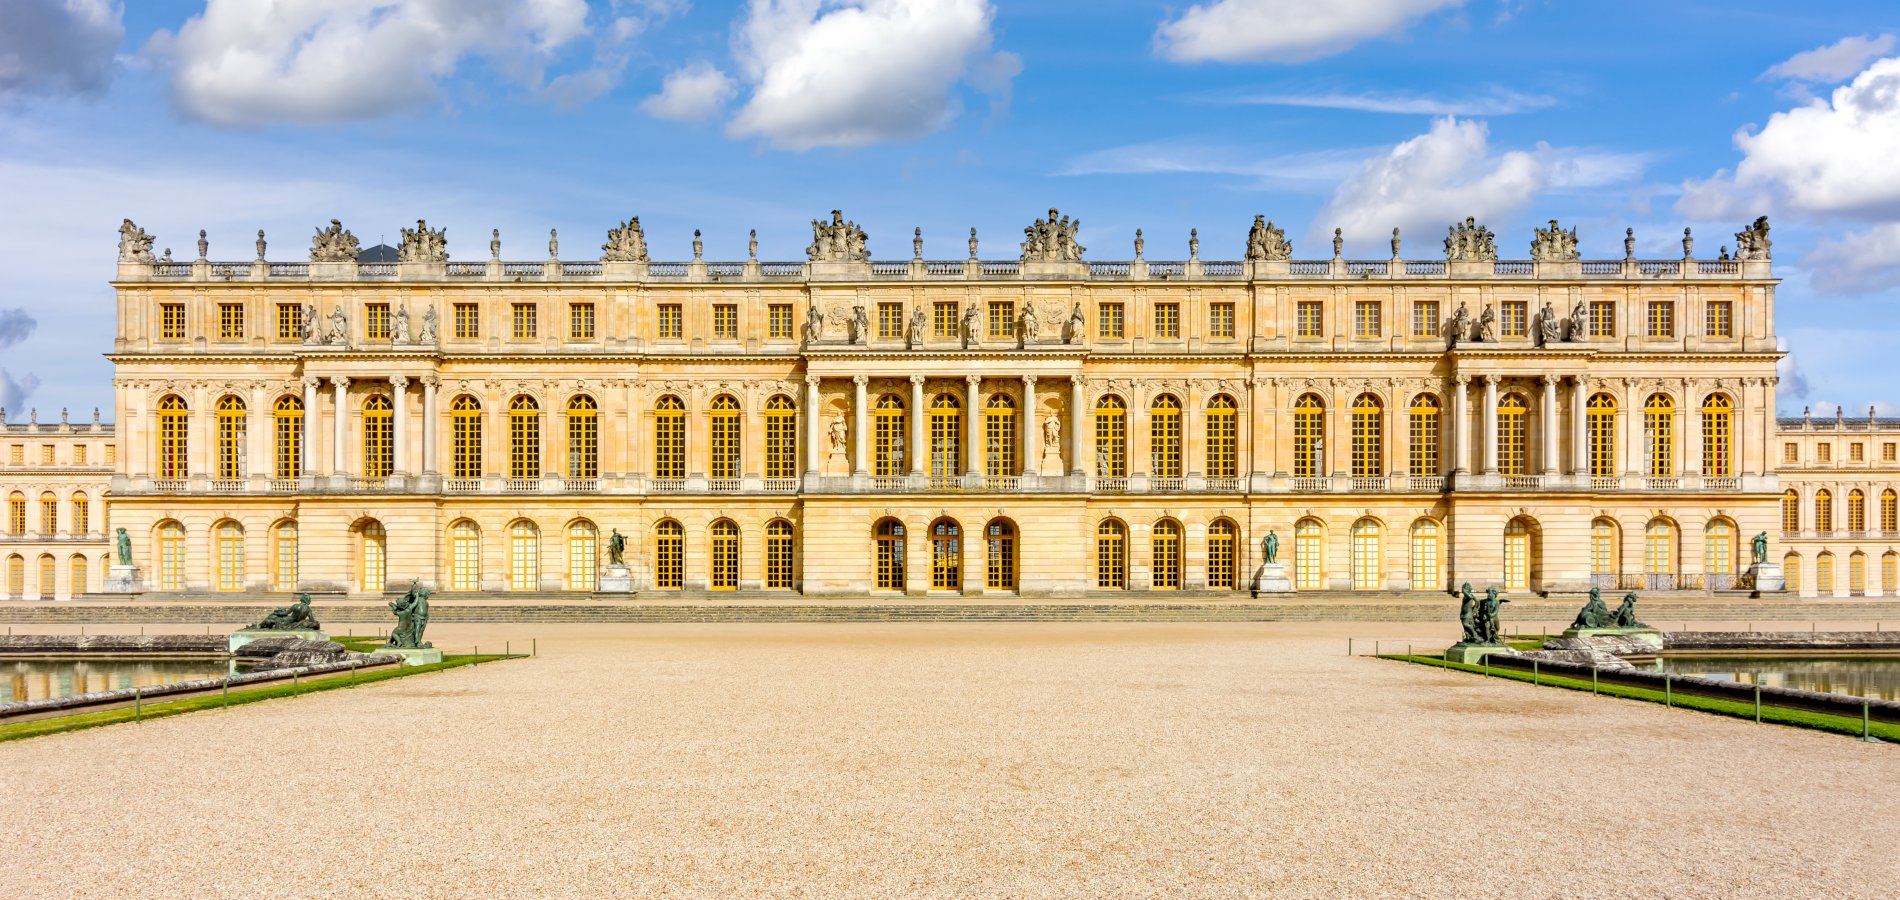 Ophorus Tours - A Private Shore Excursion from Le Havre to Versailles Palace & Gardens